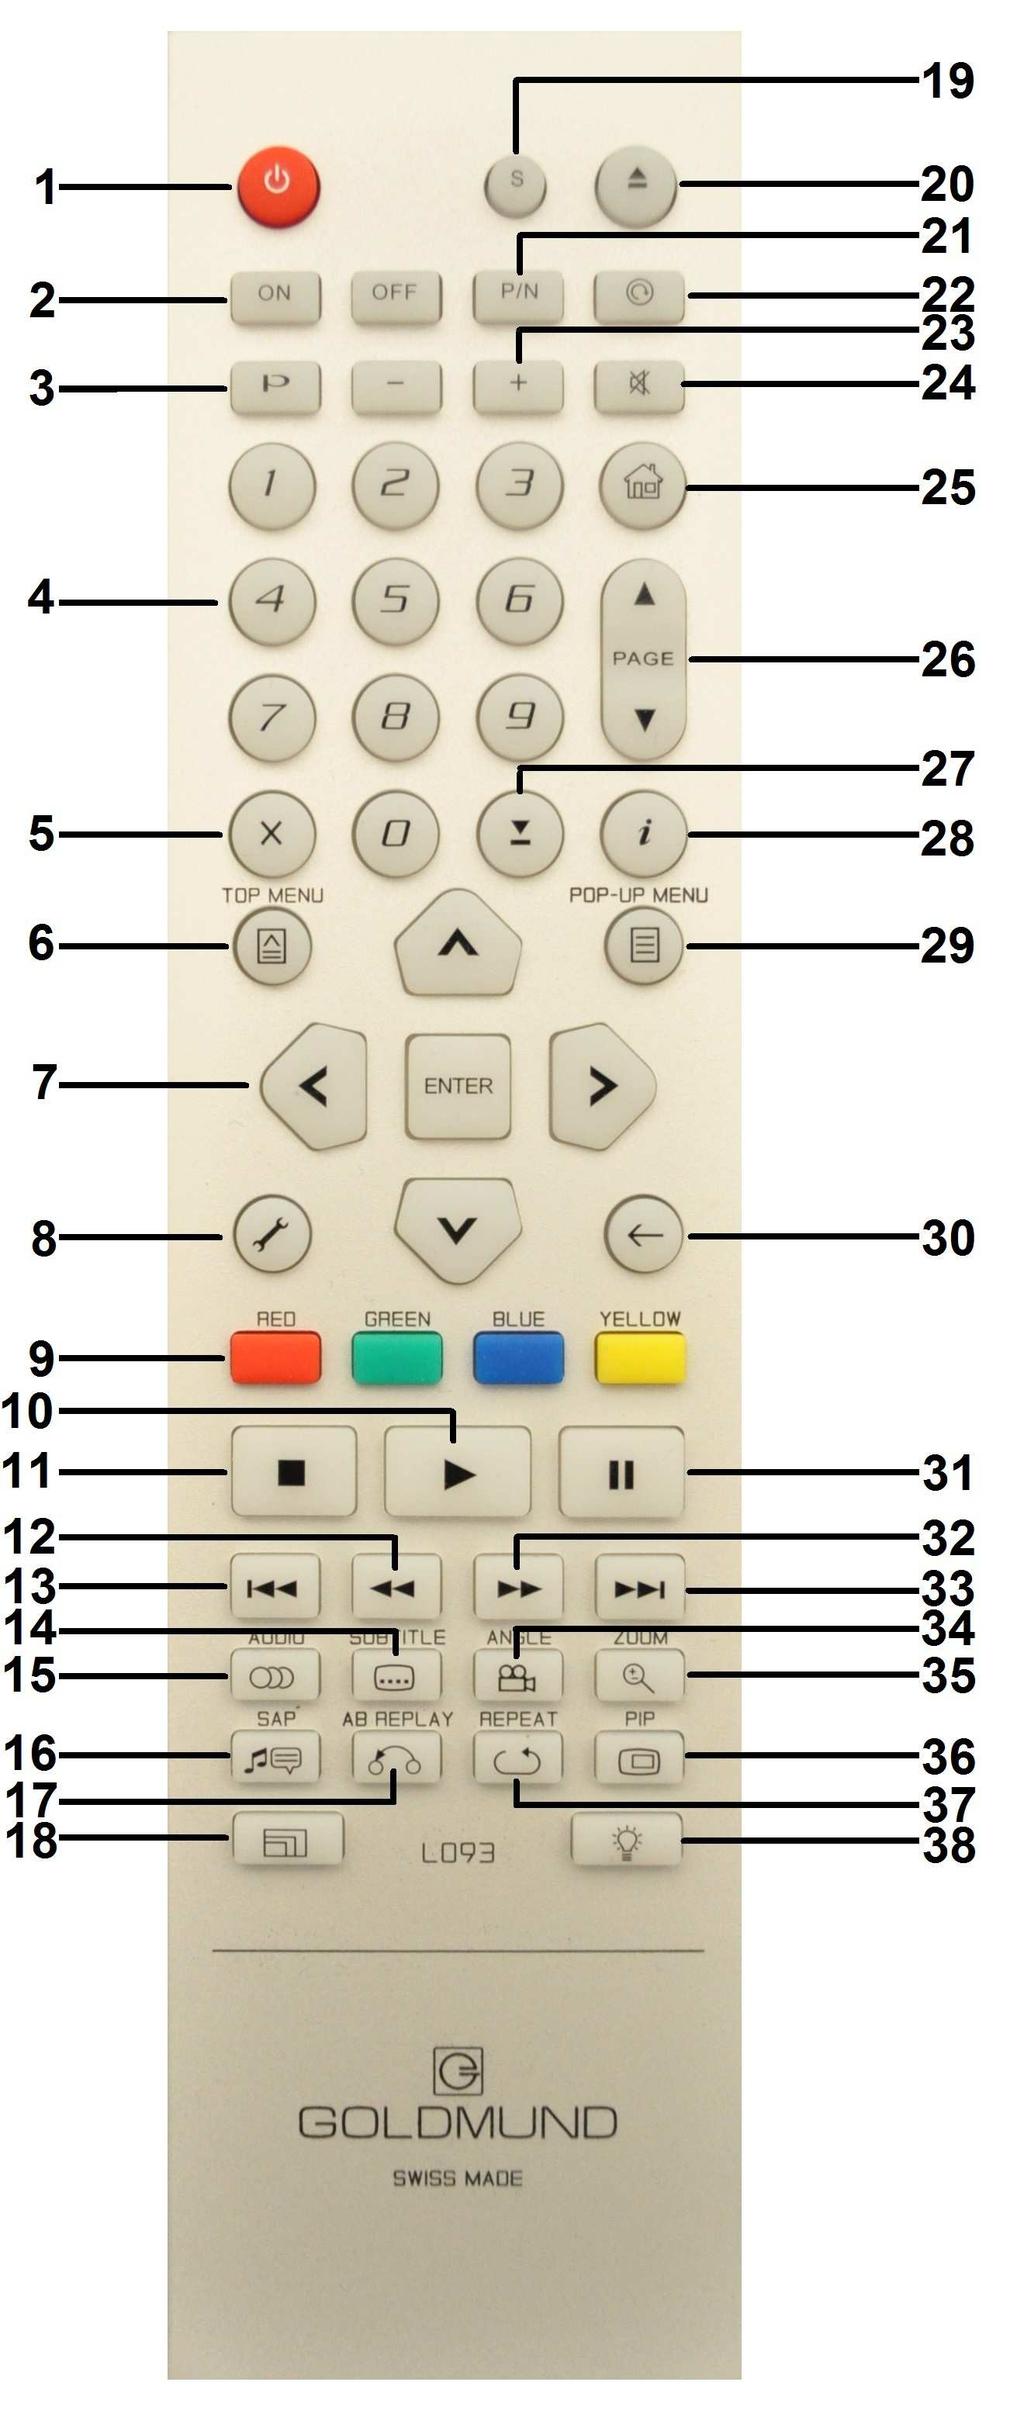 12 REMOTE CONTROL 1. POWER: Toggle power STANDBY and ON 2. NETFLIX: Netflix access Button 3. PURE AUDIO: Turn off/on video 4. NUMBER Buttons: Enter numeric values 5.